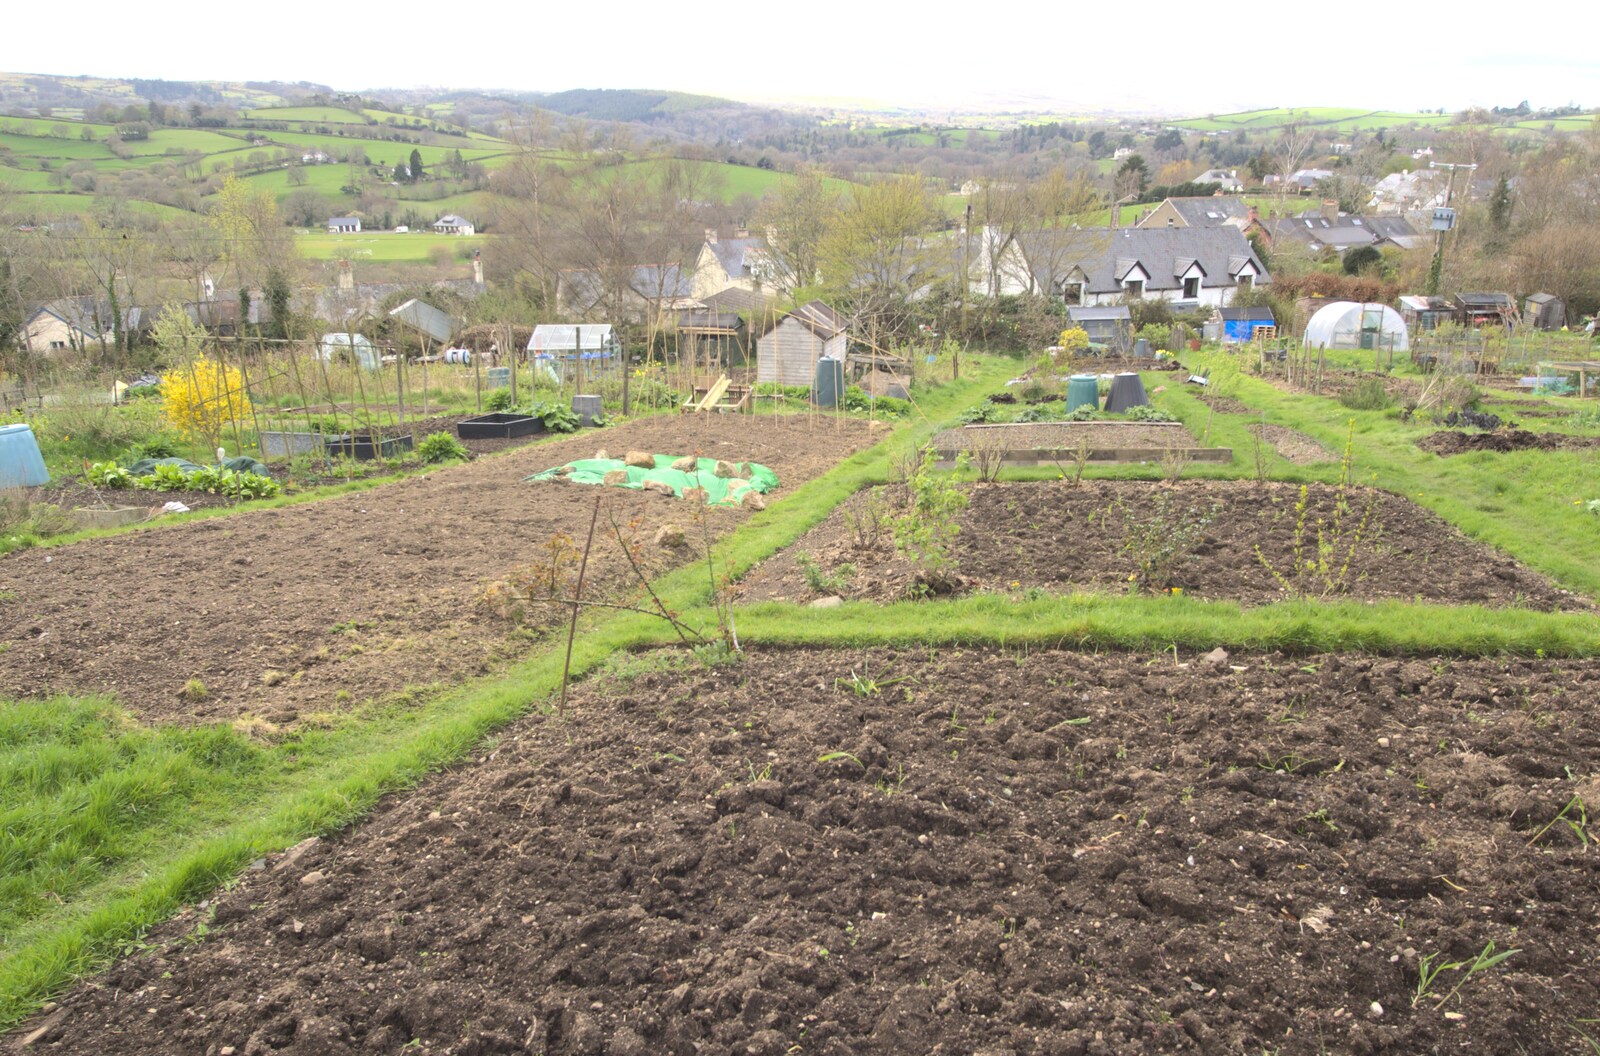 Another view over the allotments from An Easter Weekend in Chagford, Devon - 12th April 2009